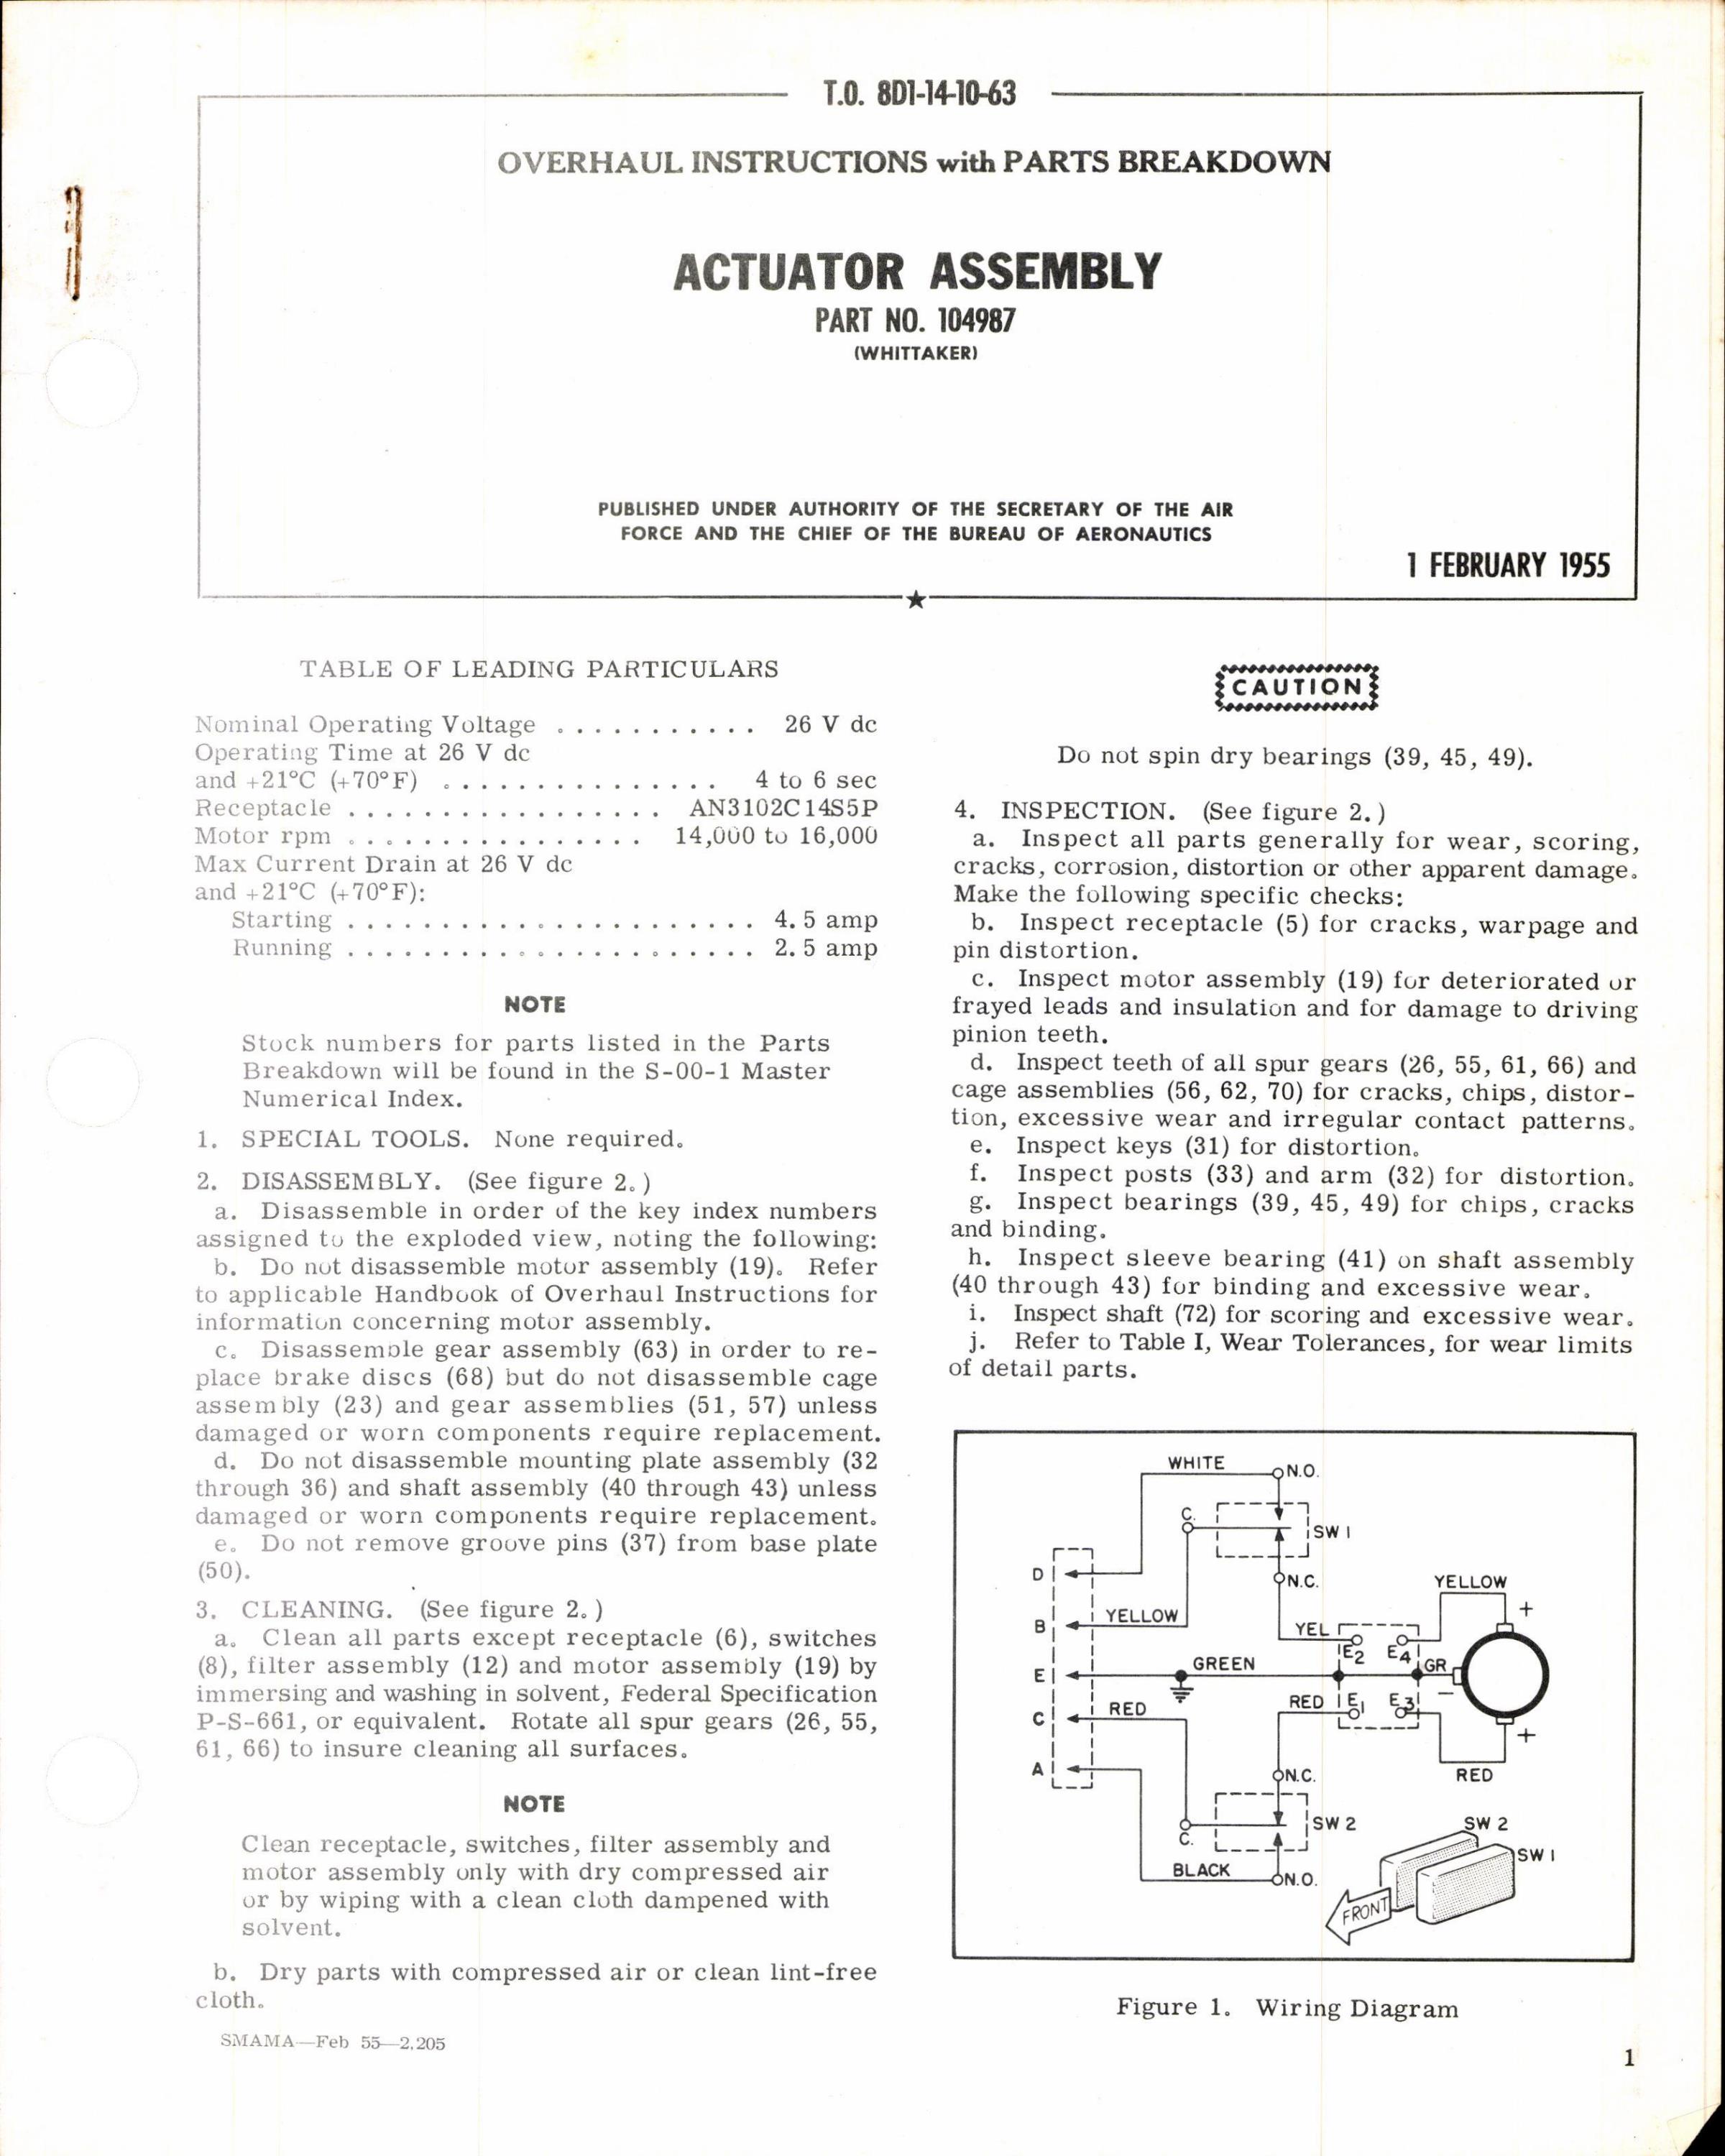 Sample page 1 from AirCorps Library document: Instructions w Parts Breakdown for Actuator Assembly Part 104987